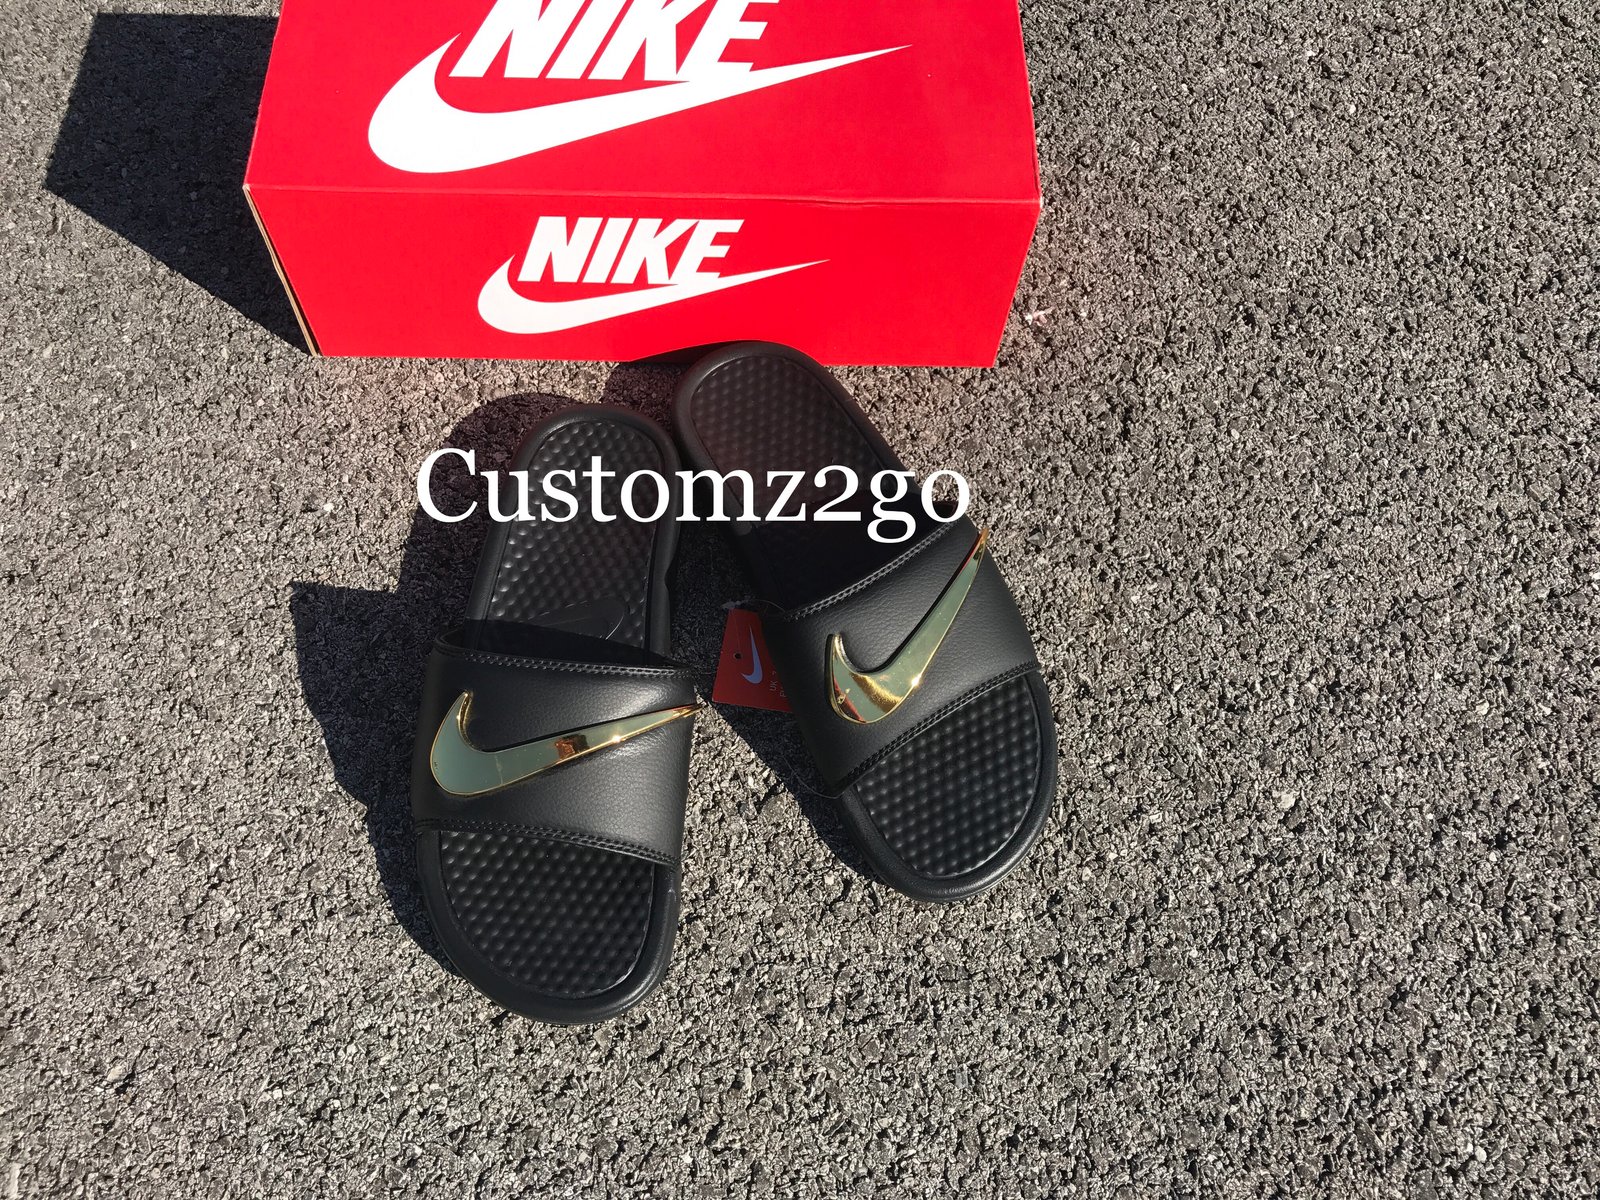 red nike sandals with gold check